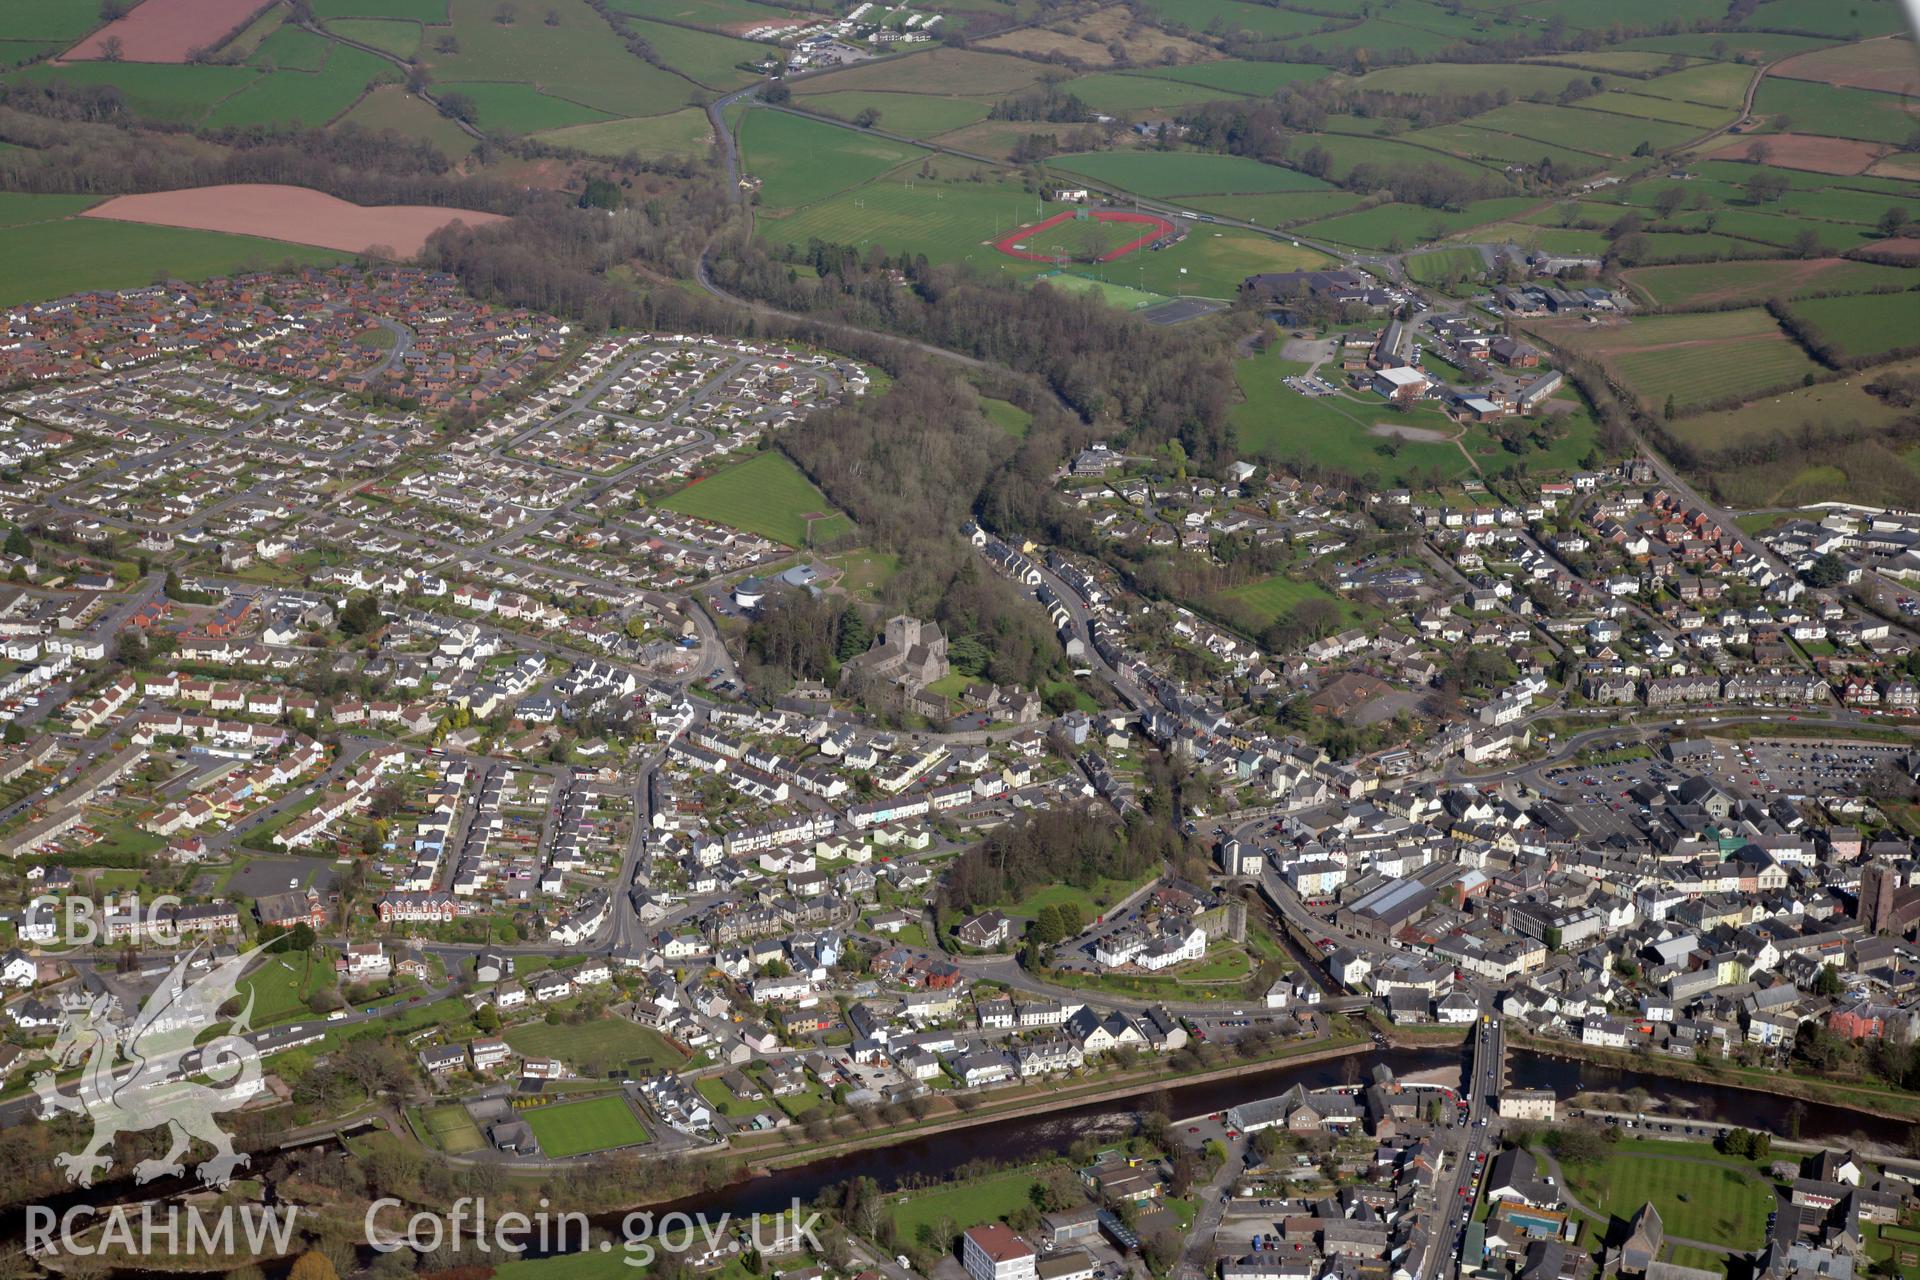 RCAHMW colour oblique photograph of Brecon Town and castle. Taken by Toby Driver and Oliver Davies on 28/03/2012.